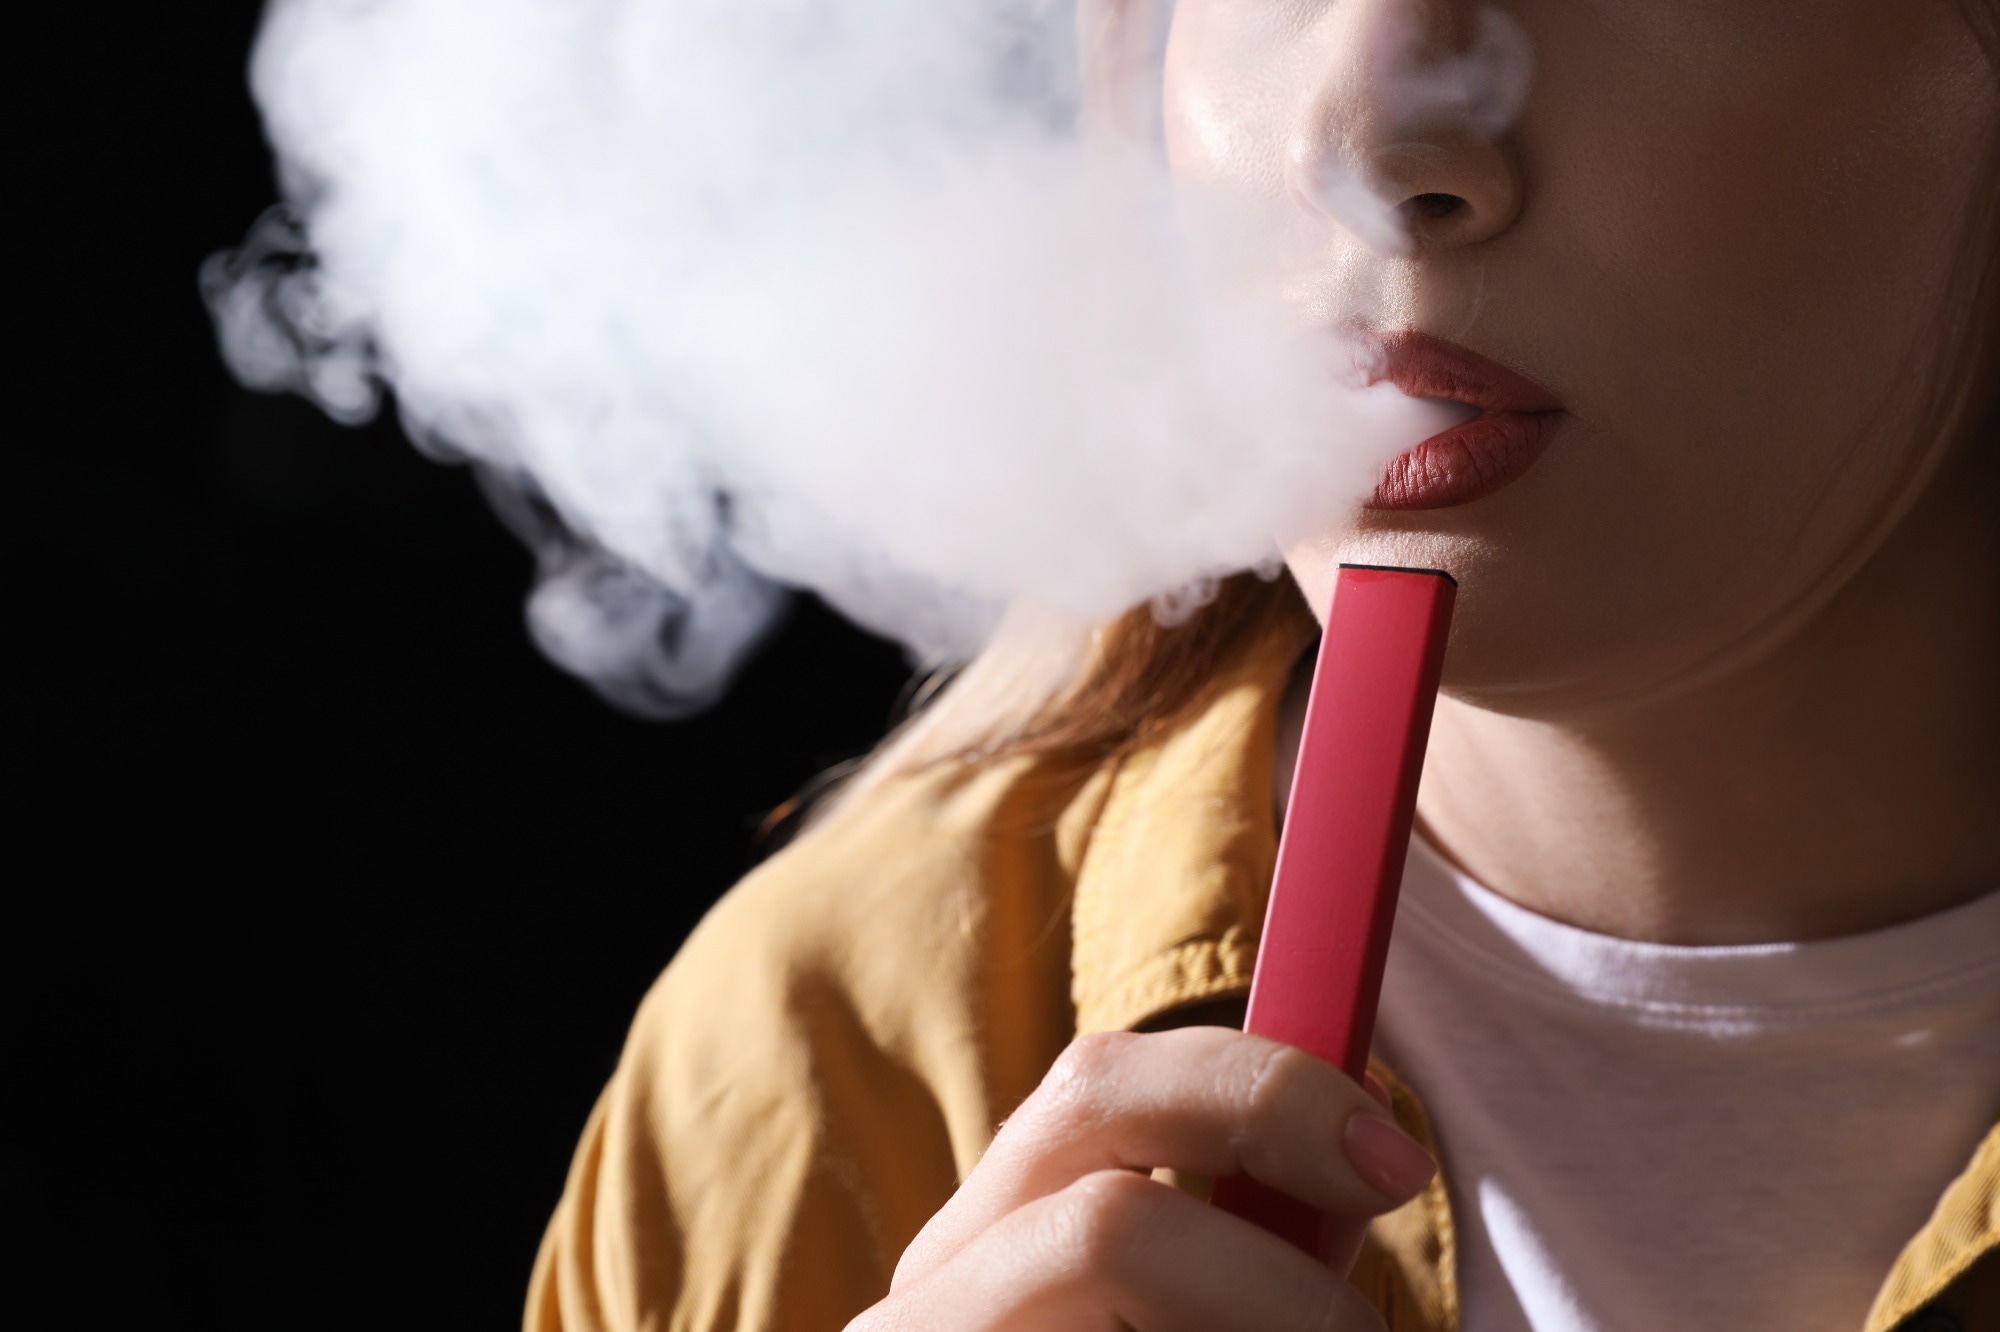 Study: Global health survey of people who vape and never smoked. Protocol for the Vaping Effects: Real-world InTernAtional Surveillance (VERITAS) Study. Image Credit: New Africa / Shutterstock.com